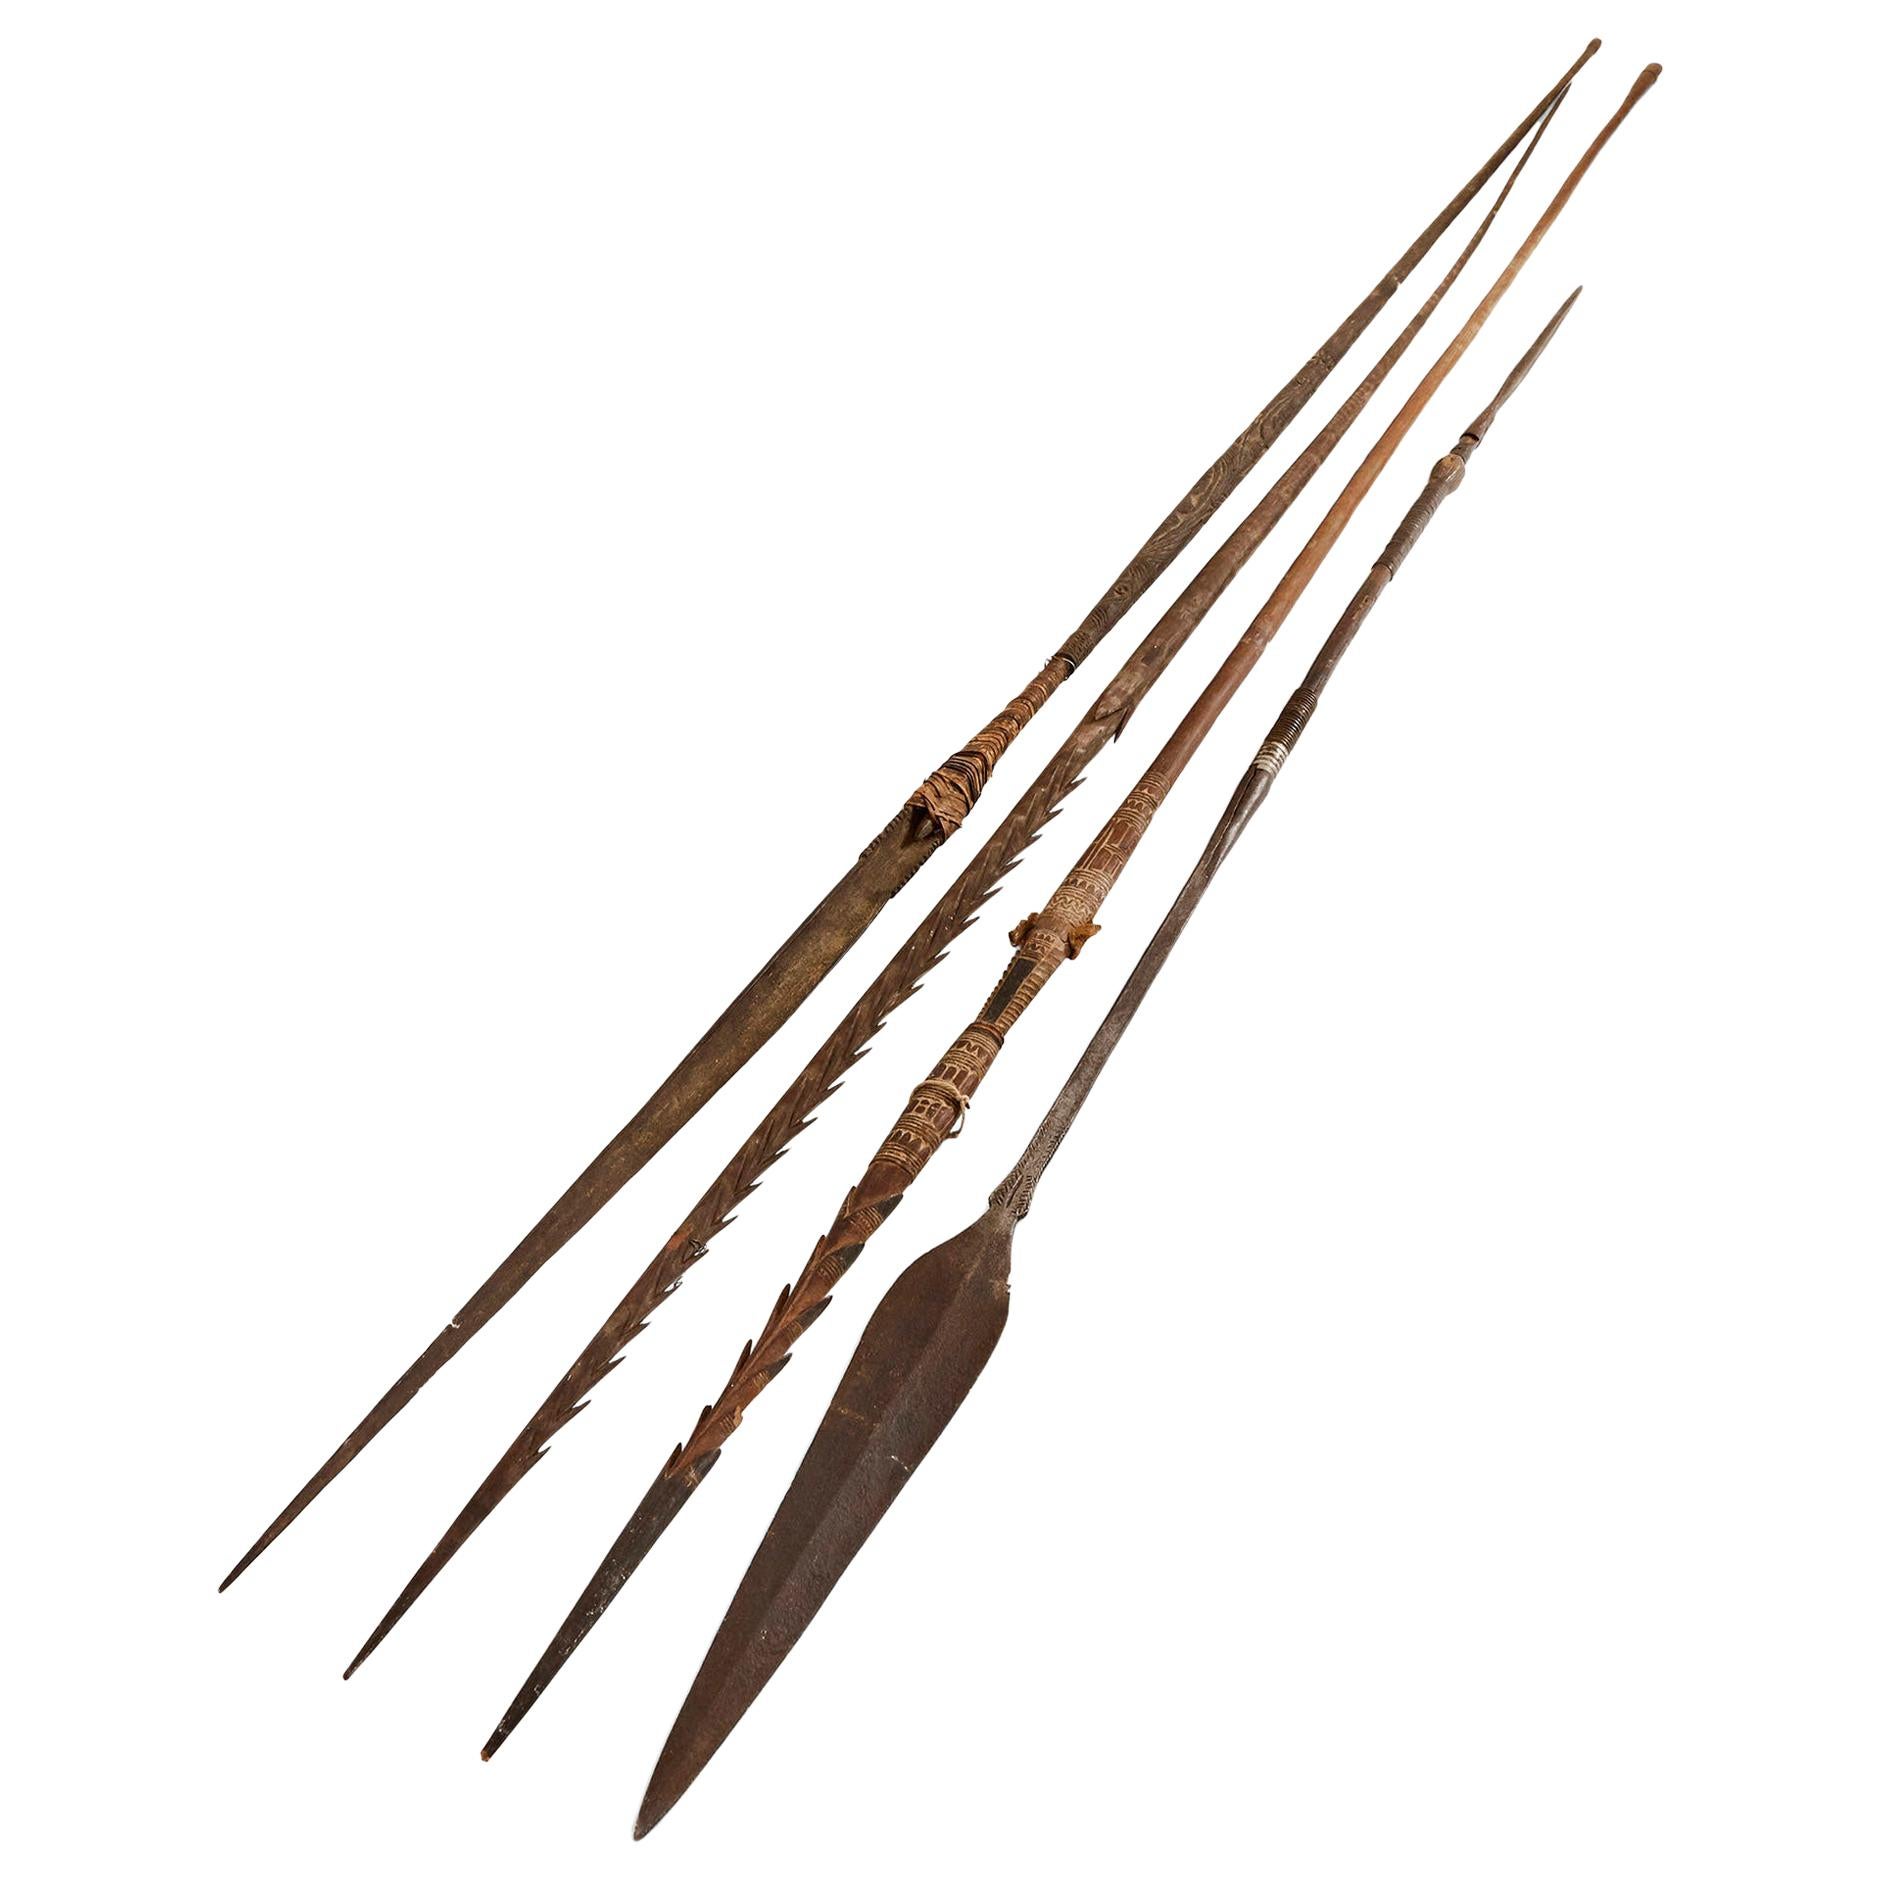 Four Wooden and Iron Hunting Spears from Africa